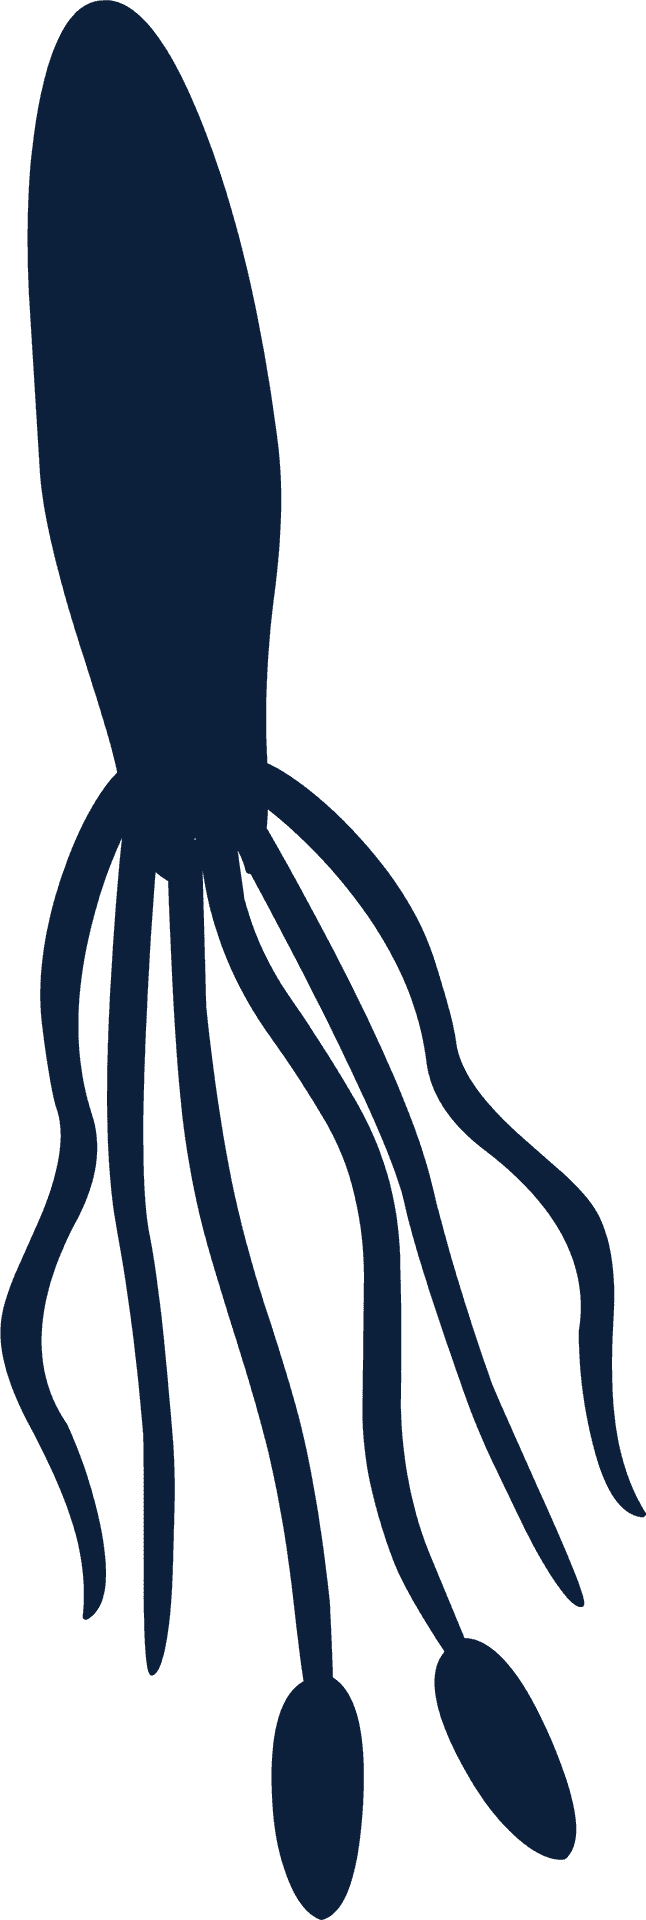 Squid Silhouette Graphic PNG image